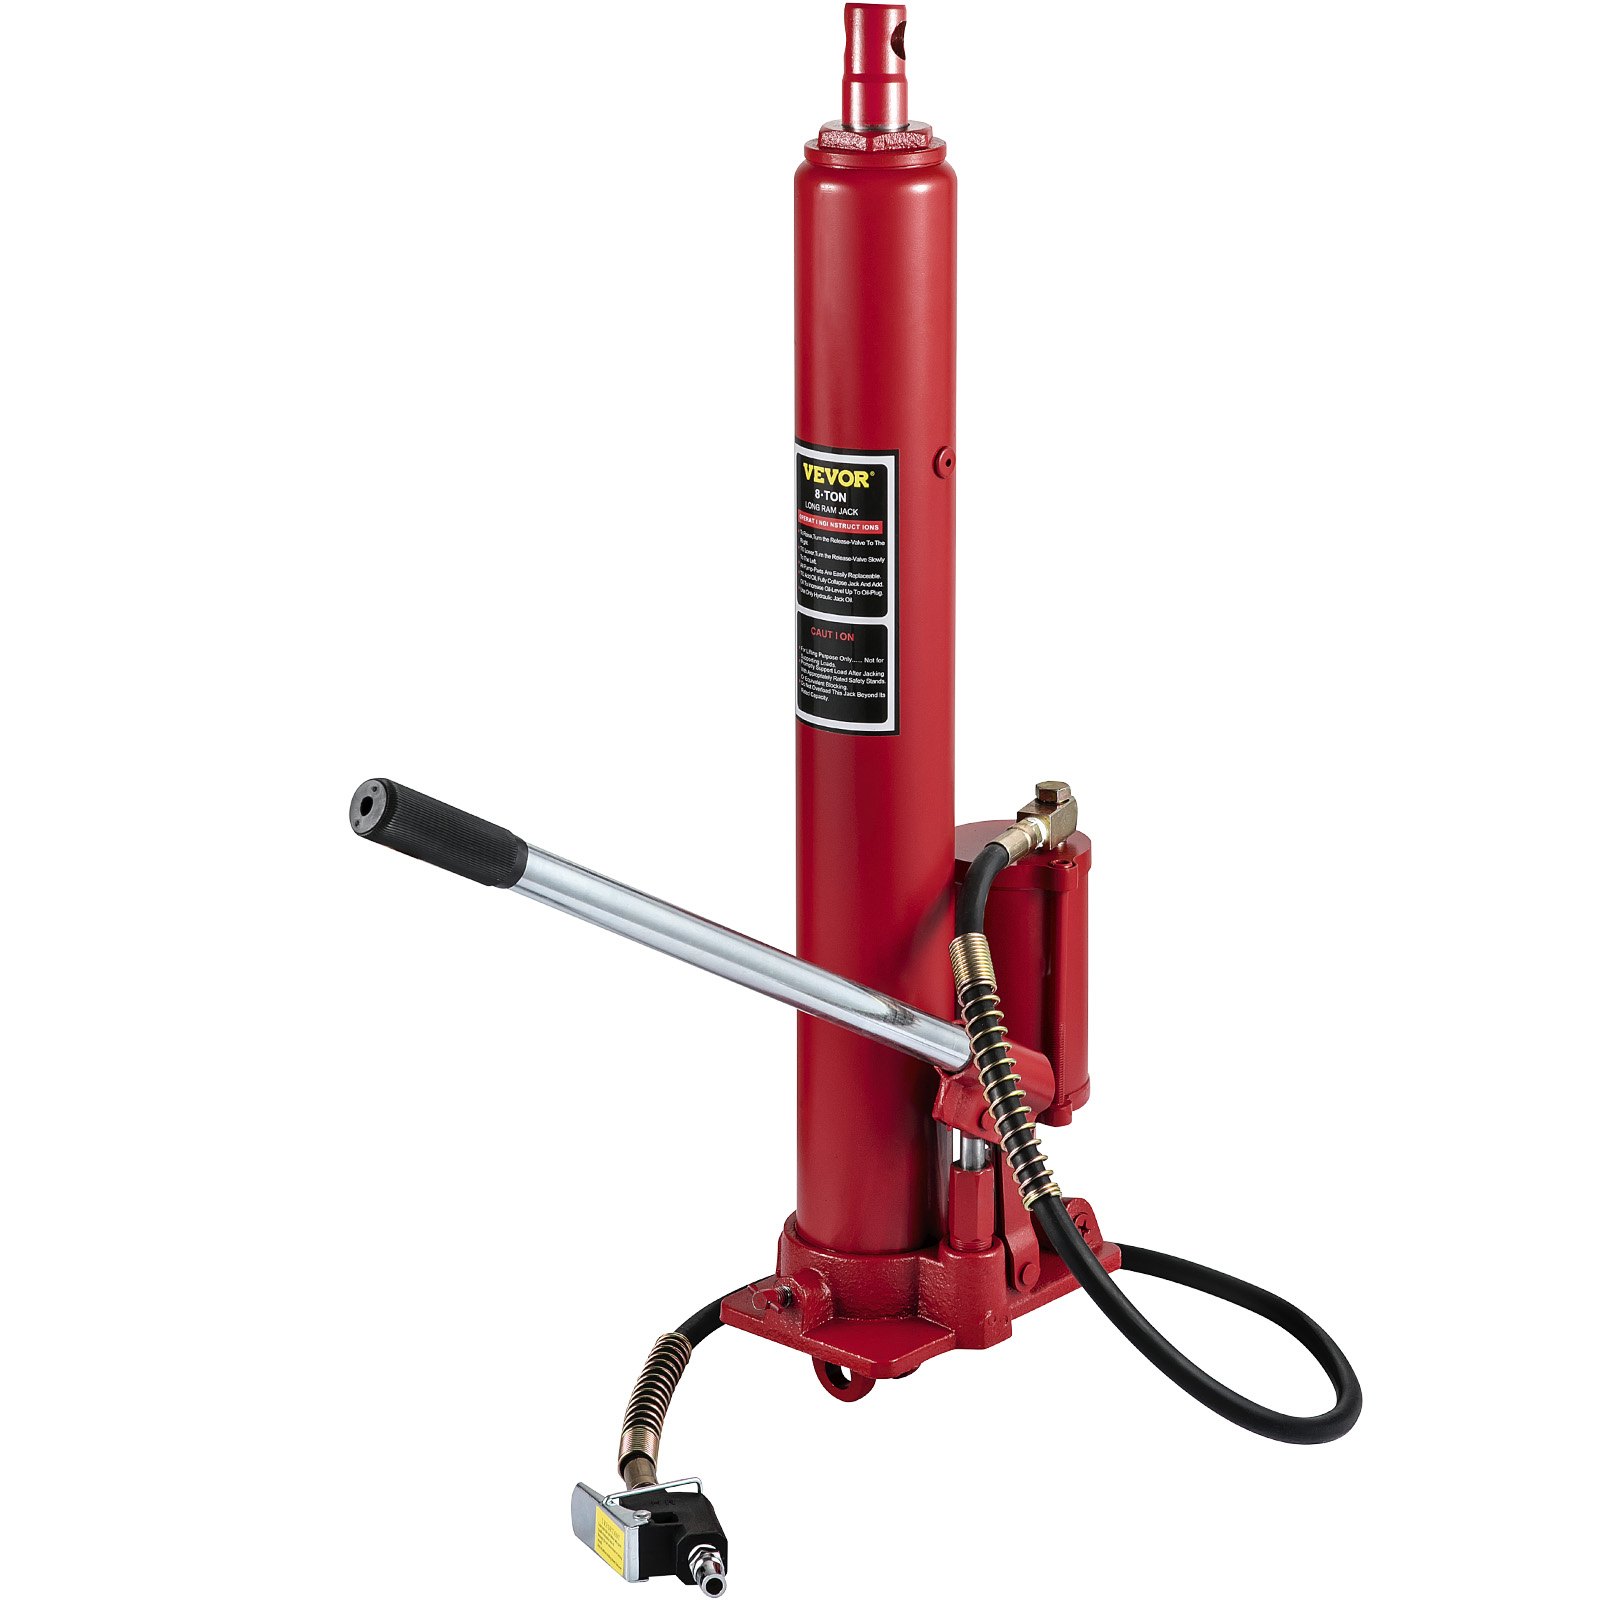 Vevor Hydraulicpneumatic Long Ram Jack 8 Tons17363 Lbs Capacity With Single Piston Pump And 9045